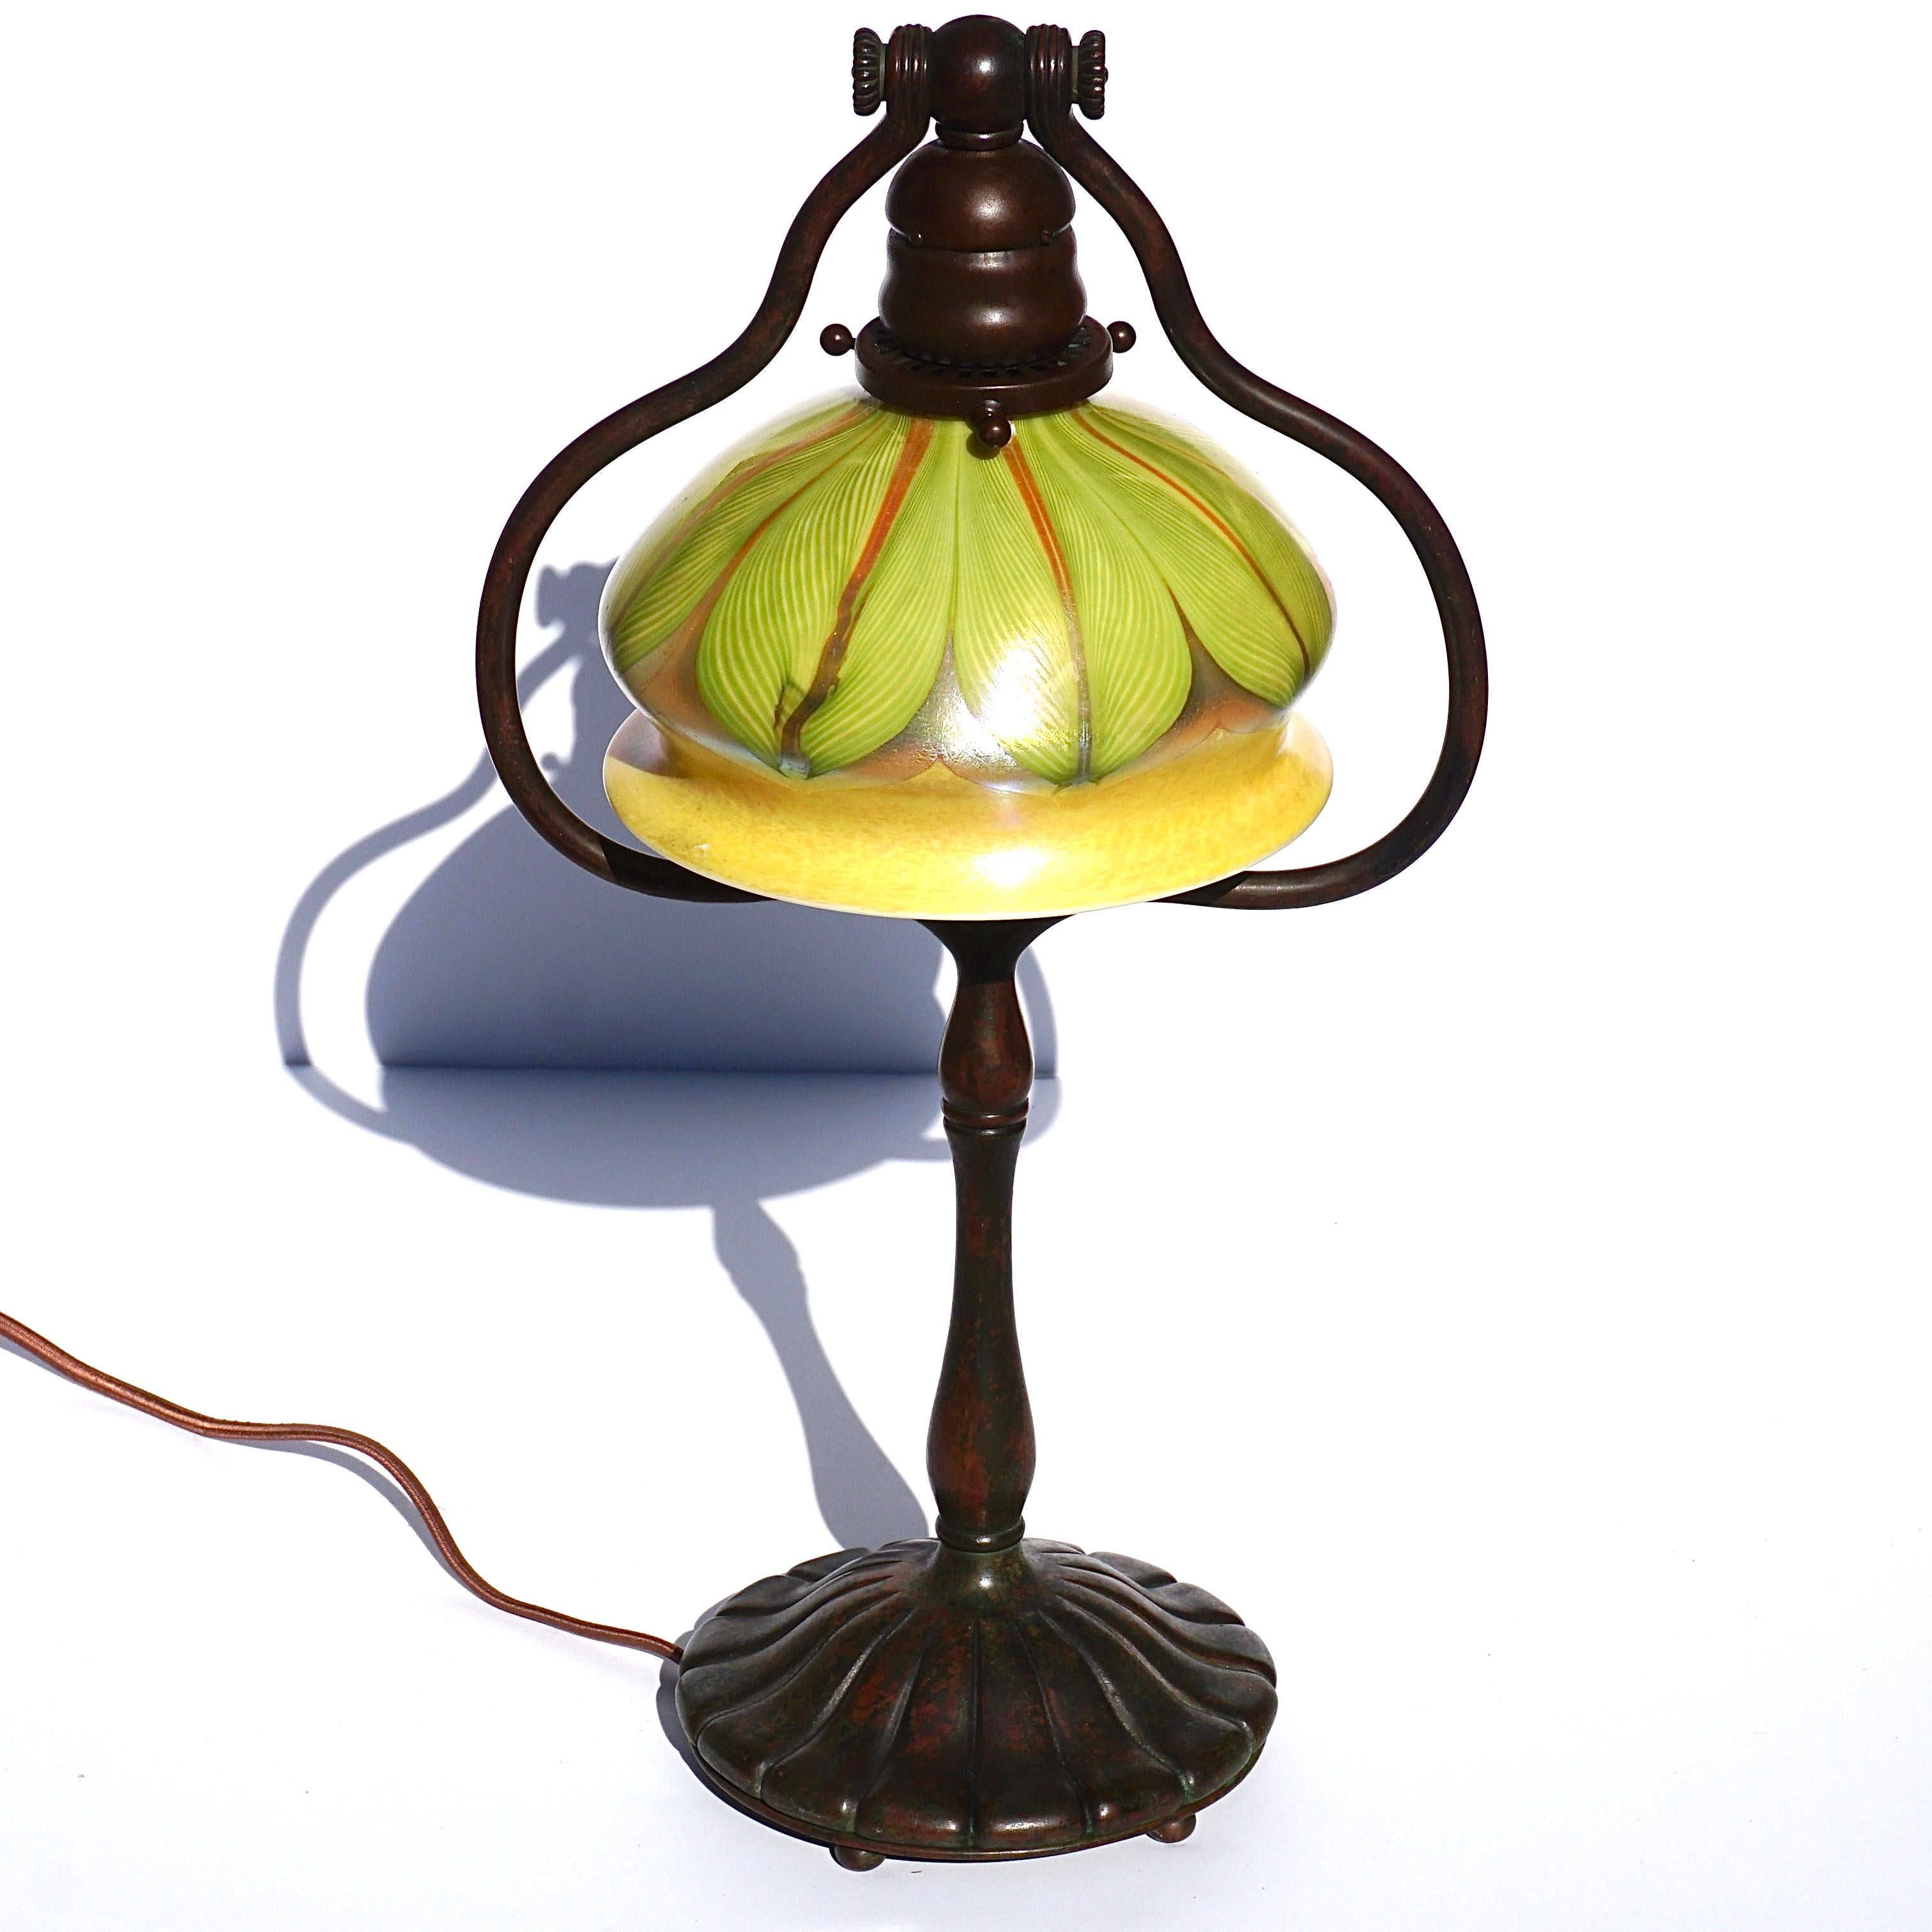 A wonderful Tiffany Studios and Louis Comfort Tiffany table lamp, circa 1900
This Art Nouveau lamp would make for a wonderful gift, an excellent investment and adds class to any setting.

Bronze base with an excellent original patina, signed